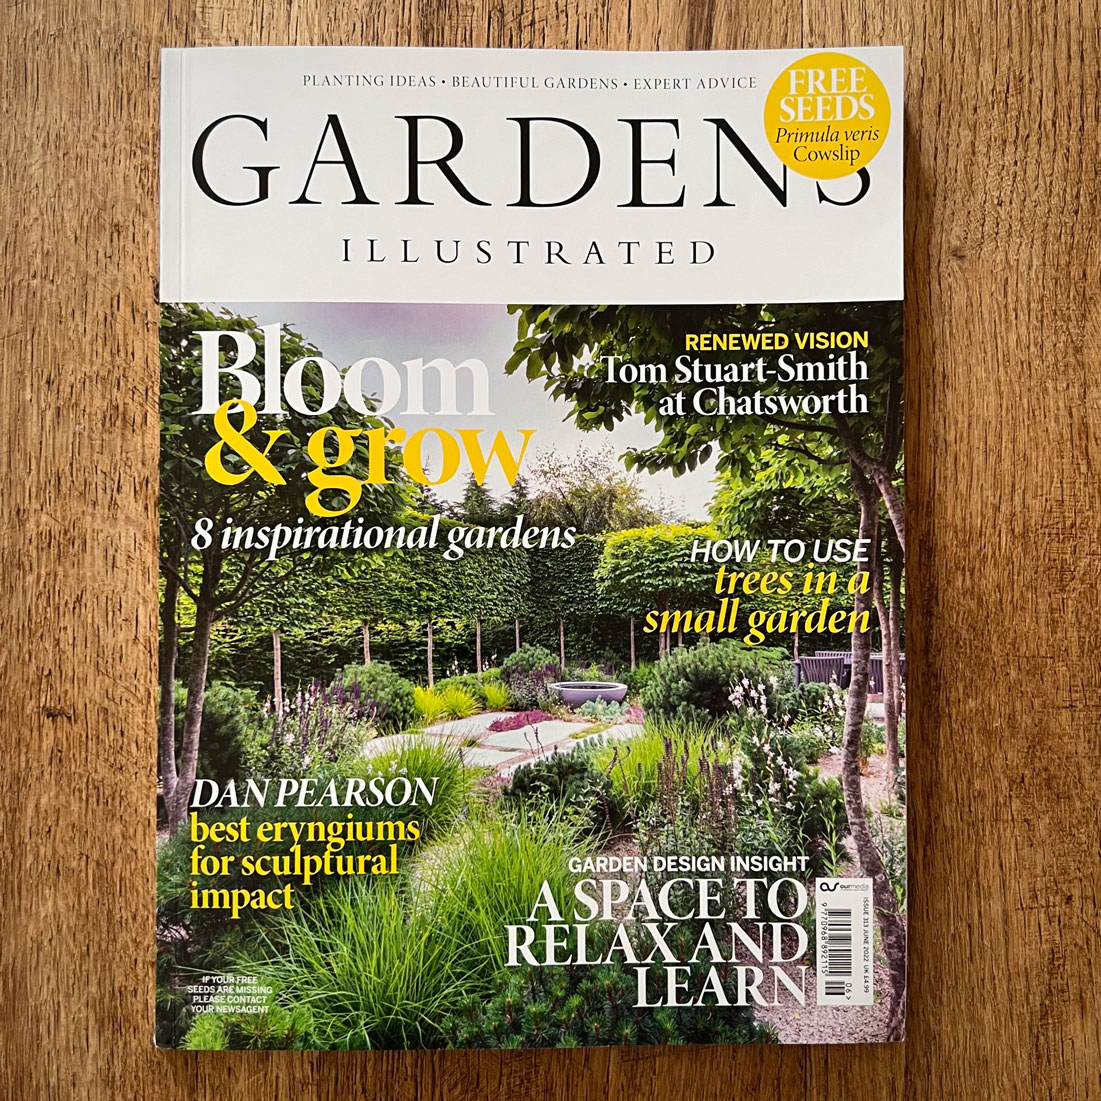 Colm Joseph Suffolk Garden design featured on front page of Gardens Illustrated magazine June 